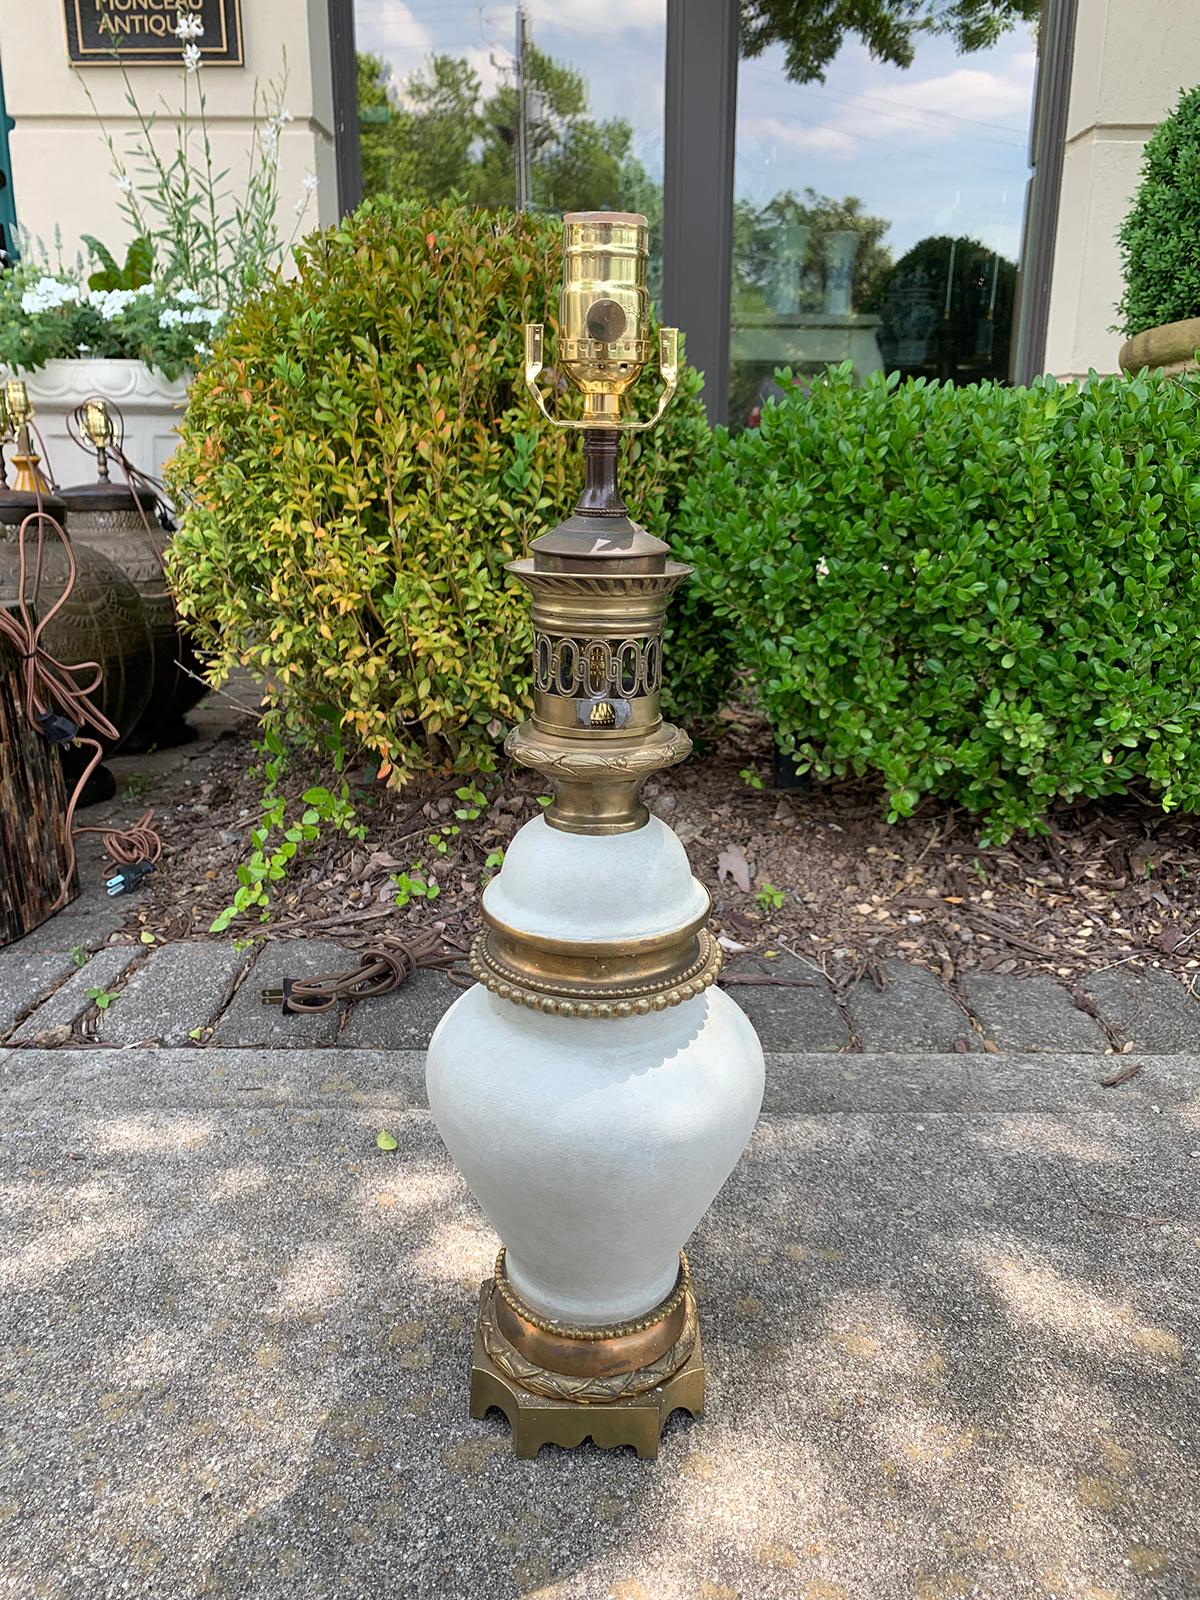 19th century French bronze mounted porcelain lamp with custom light celadon finish
Brand new wiring
Formally an oil lamp
Measures: 6